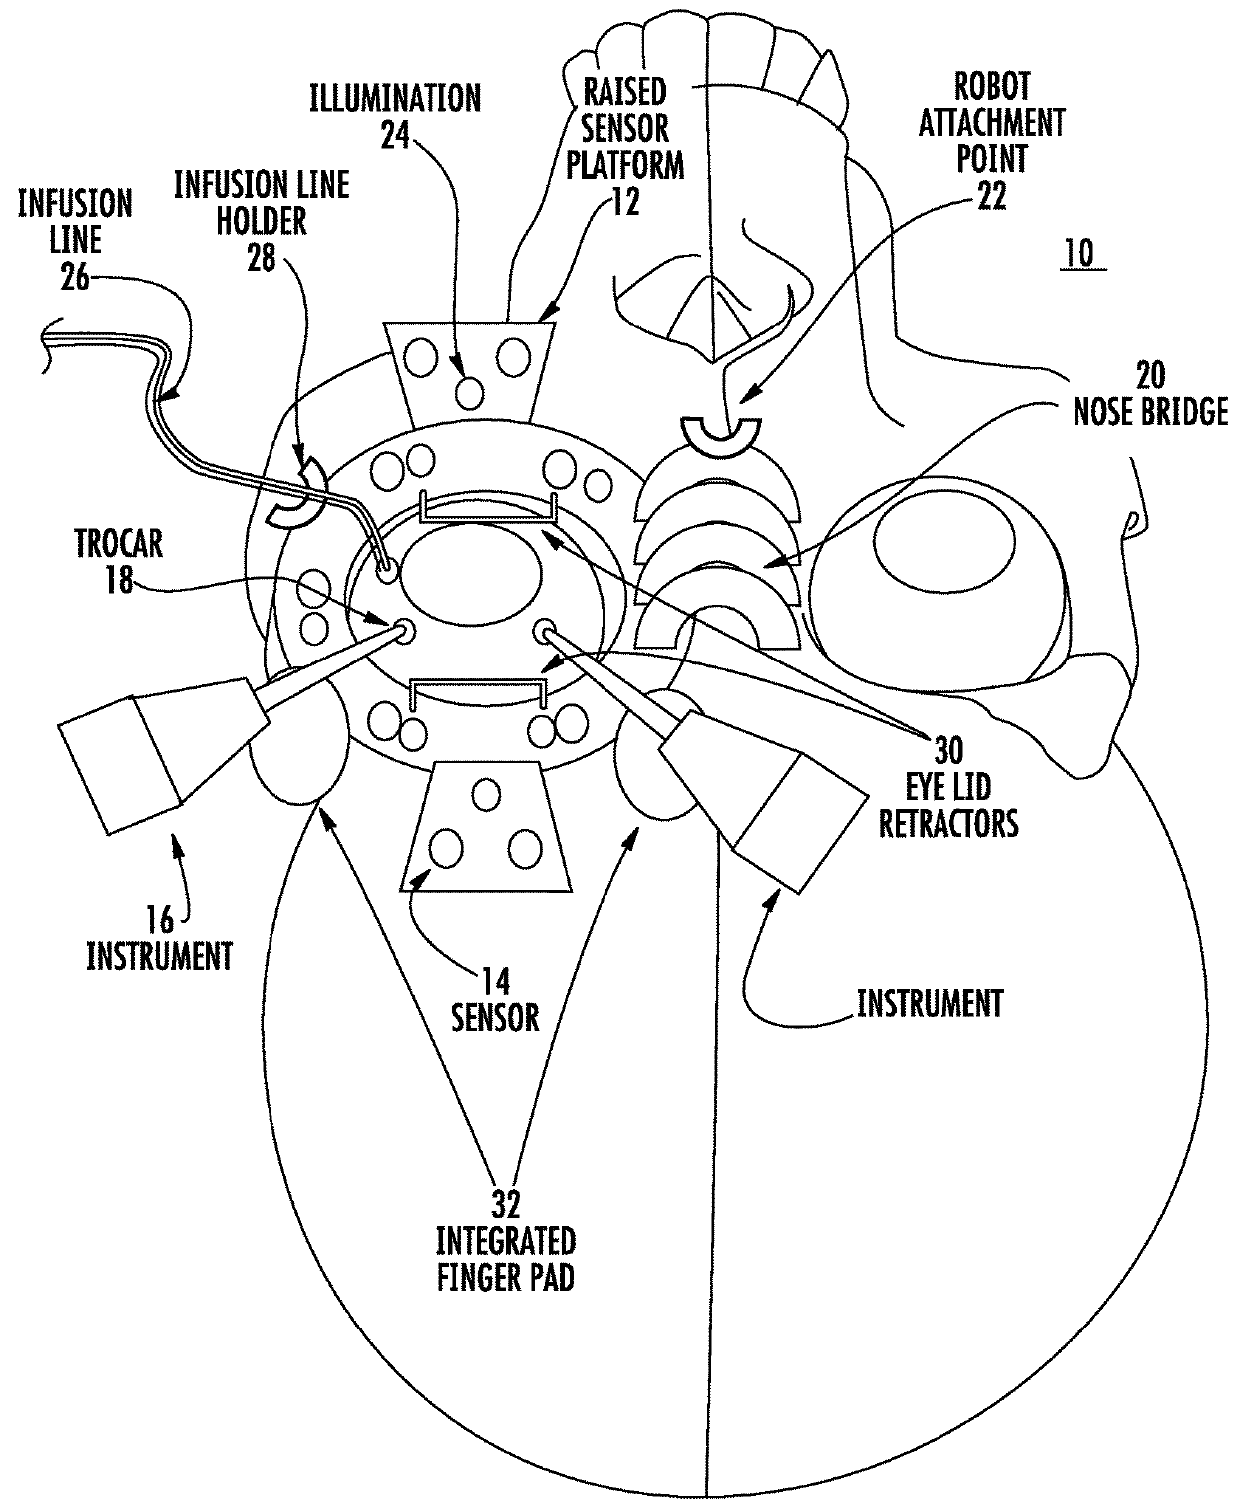 System for tracking microsurgical instrumentation